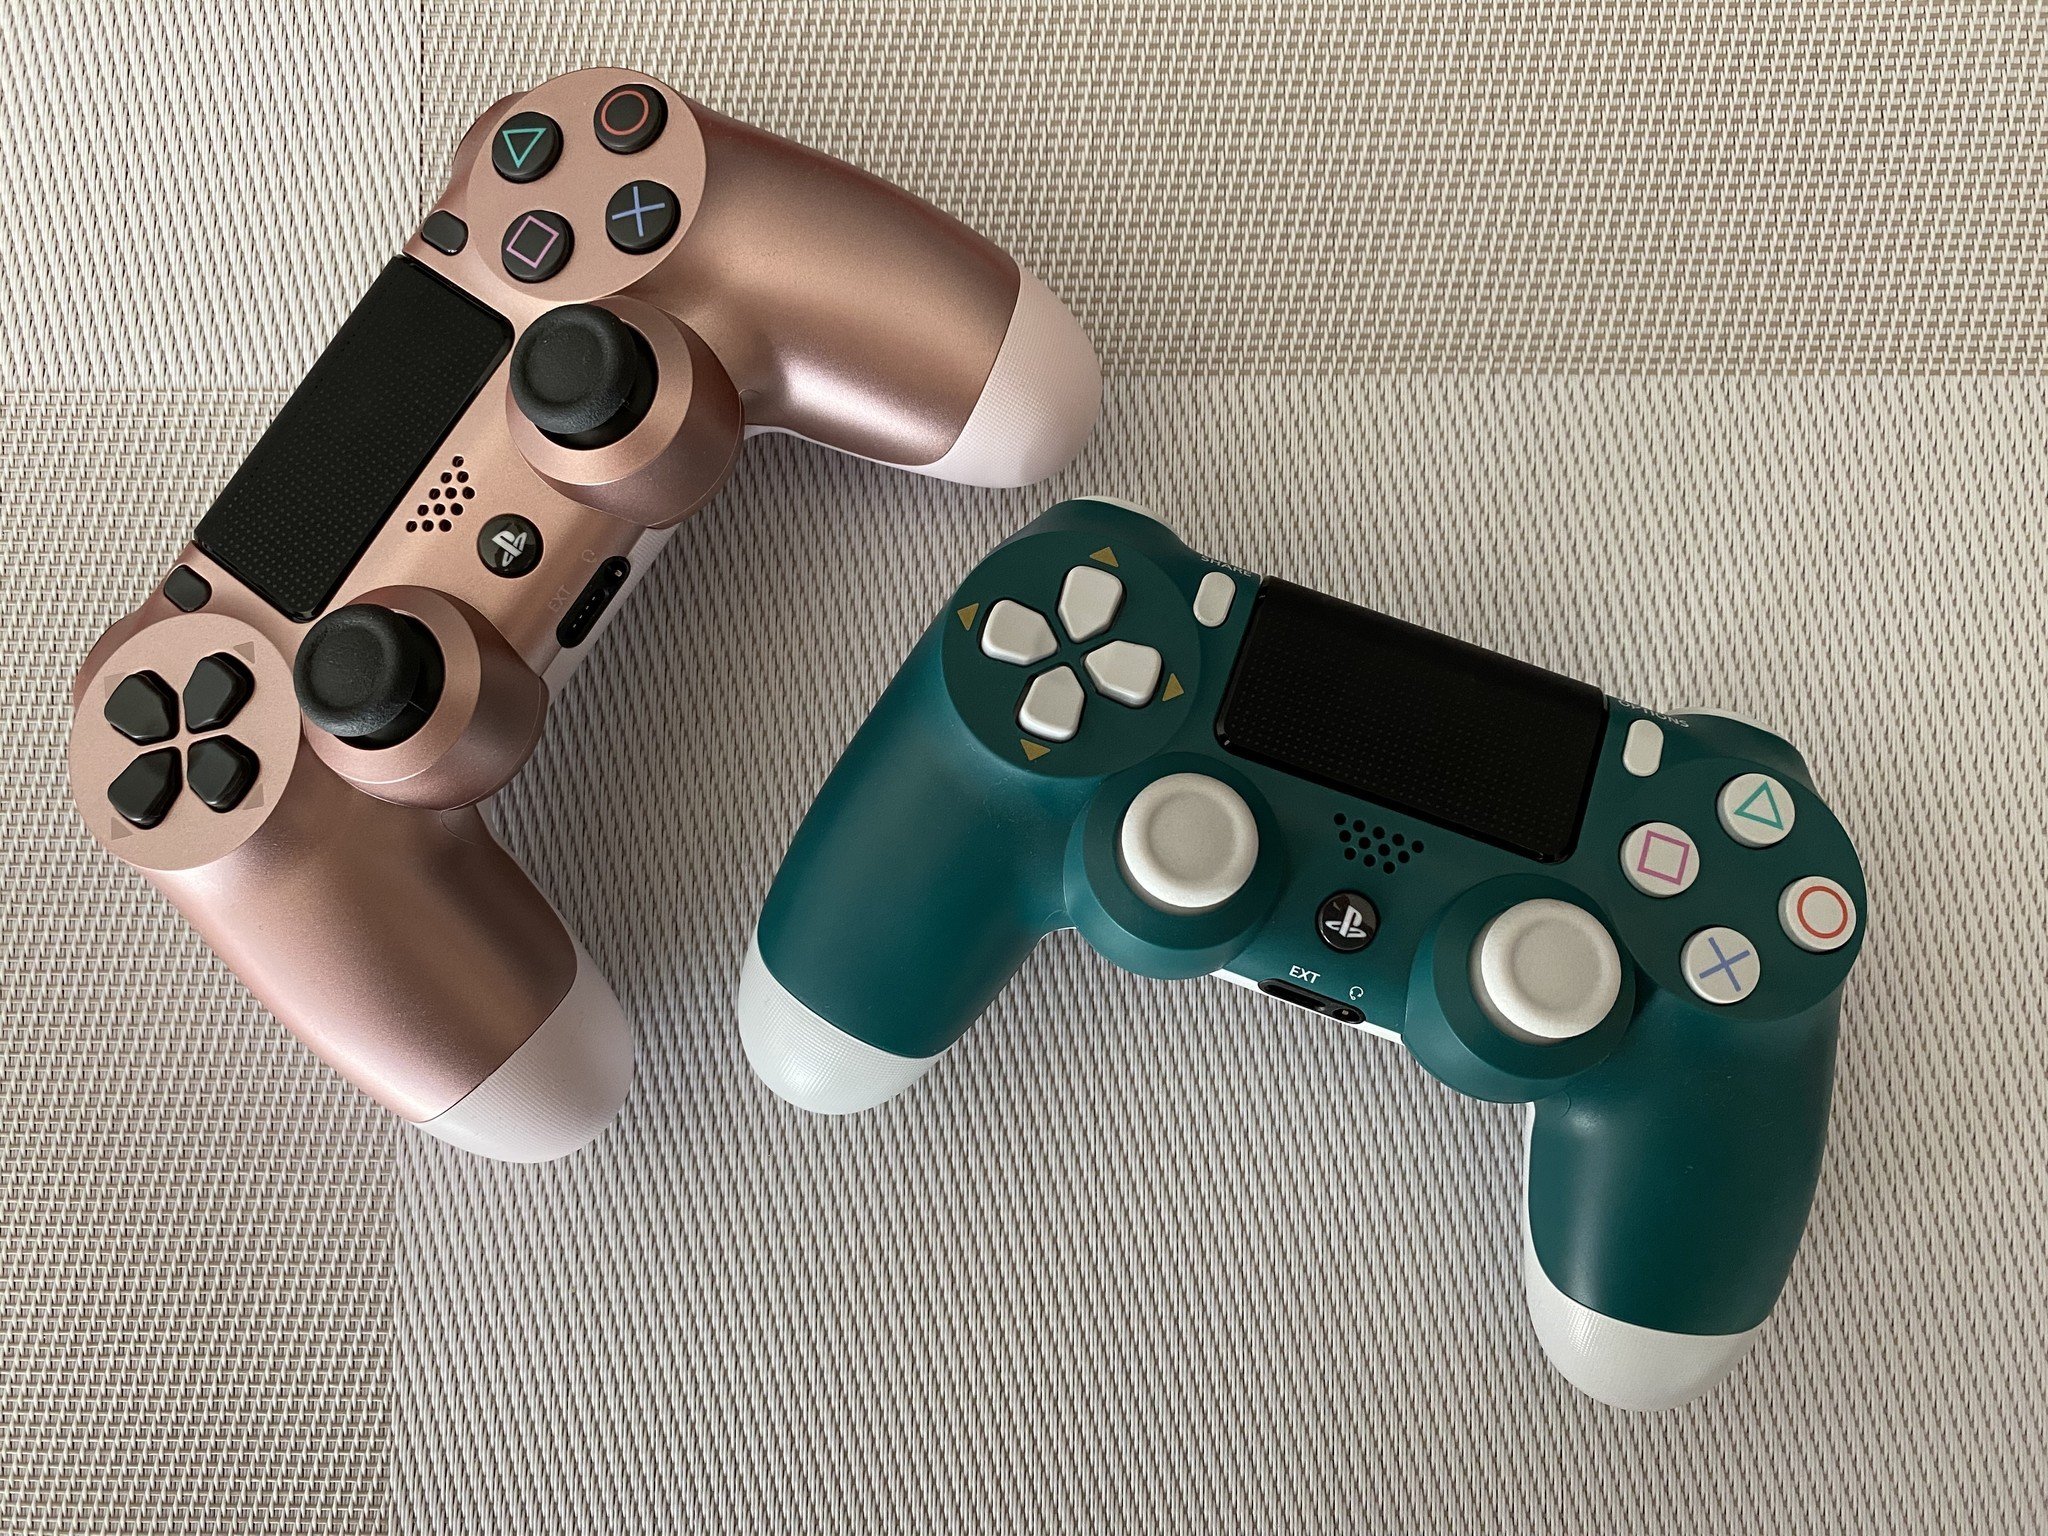 Rose Gold and Alpine Green DualShock 4 controllers